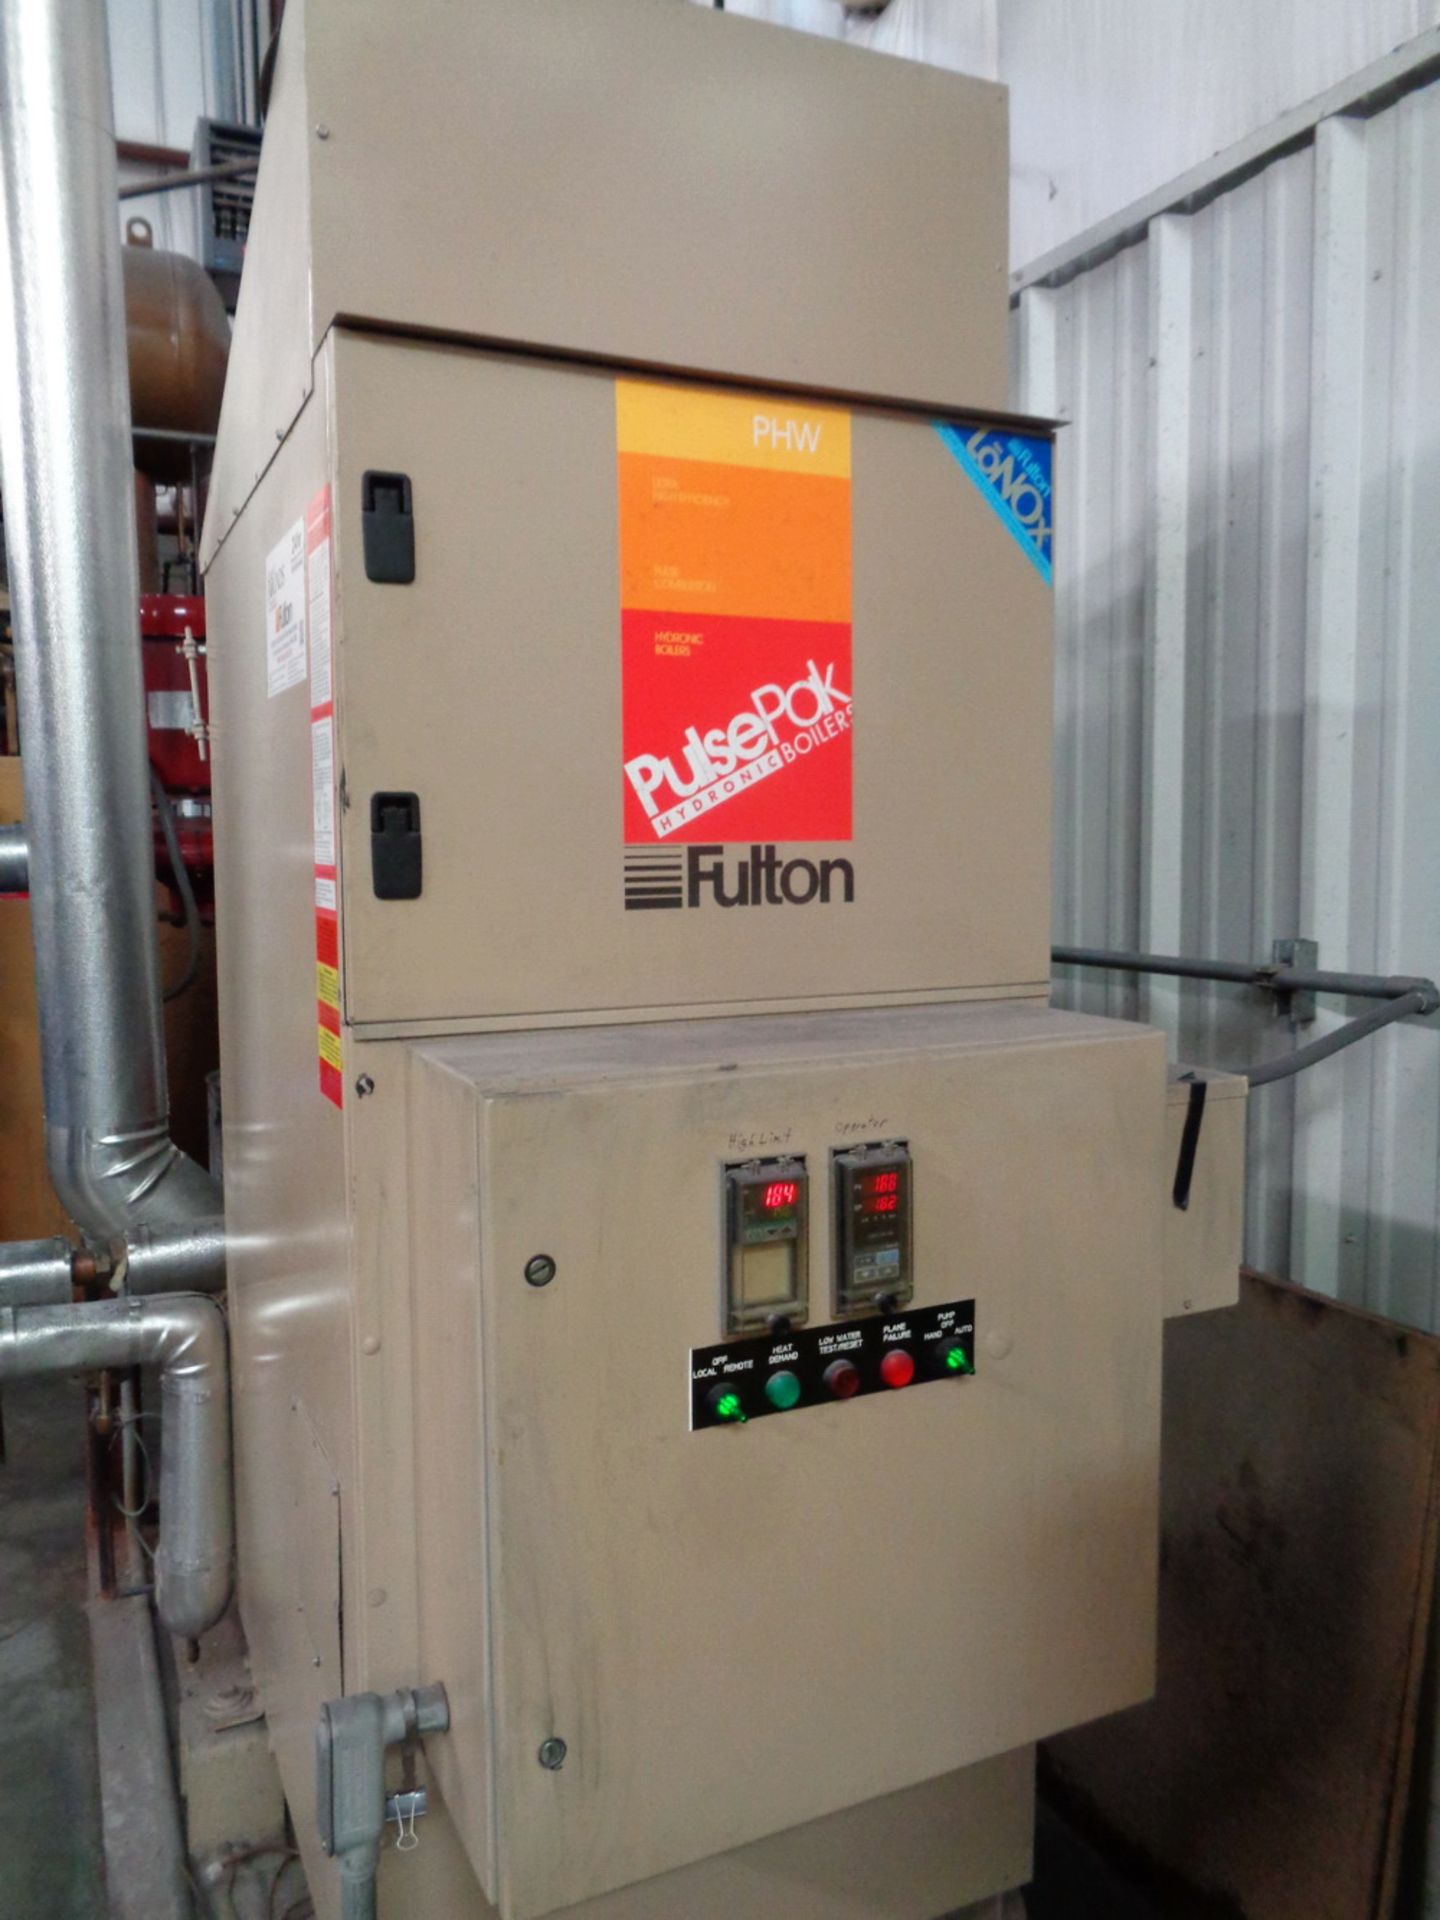 Fulton Gas Fired Pulse Combustion Boiler, Model PHW-500 - Image 2 of 5